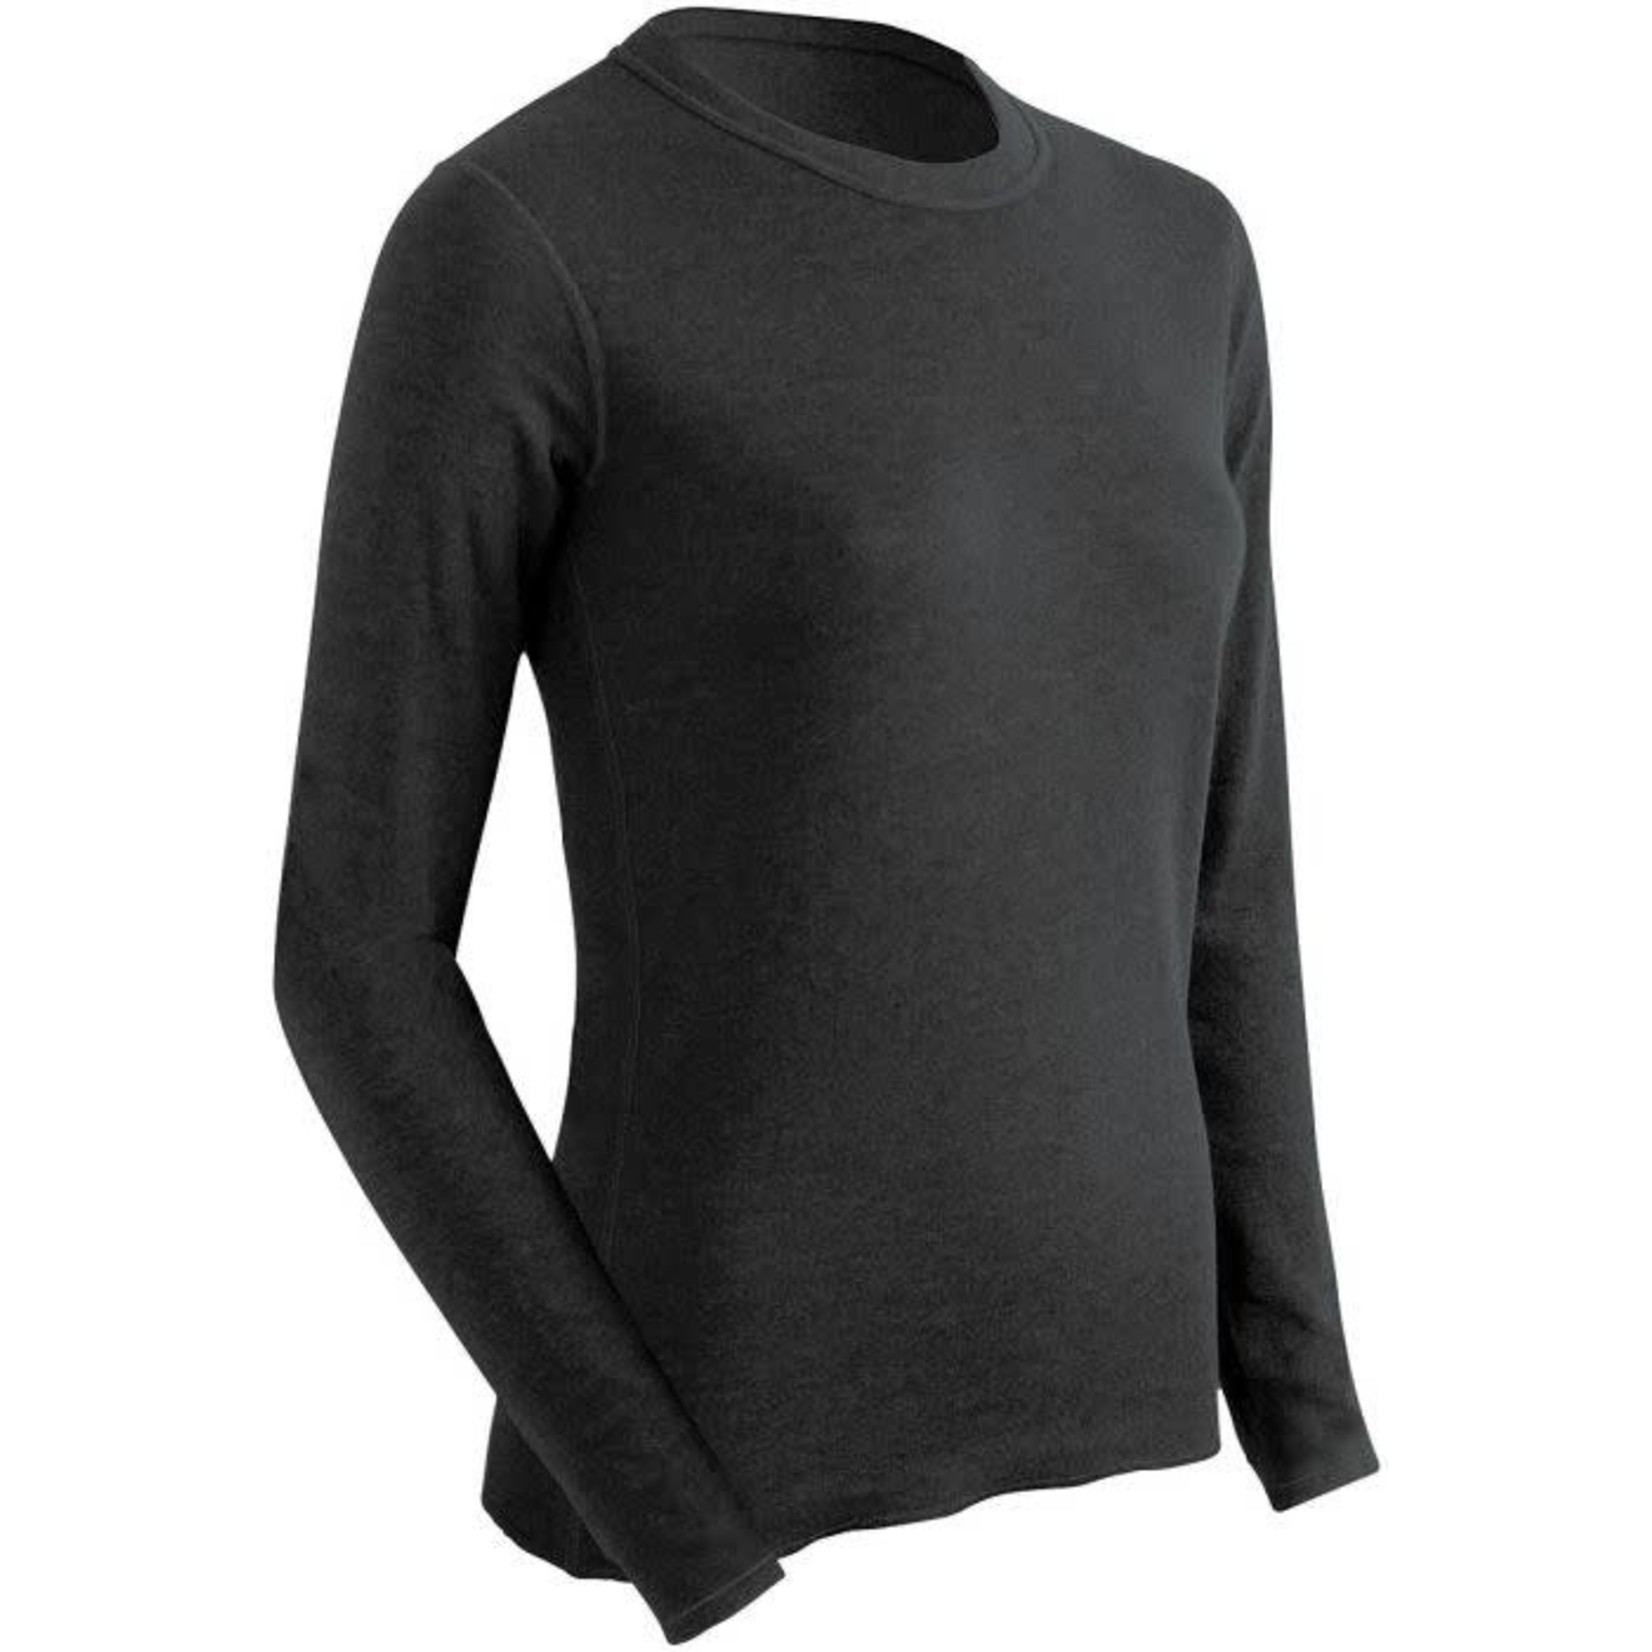 COLDPRUF Polypro Base Layer Top M's